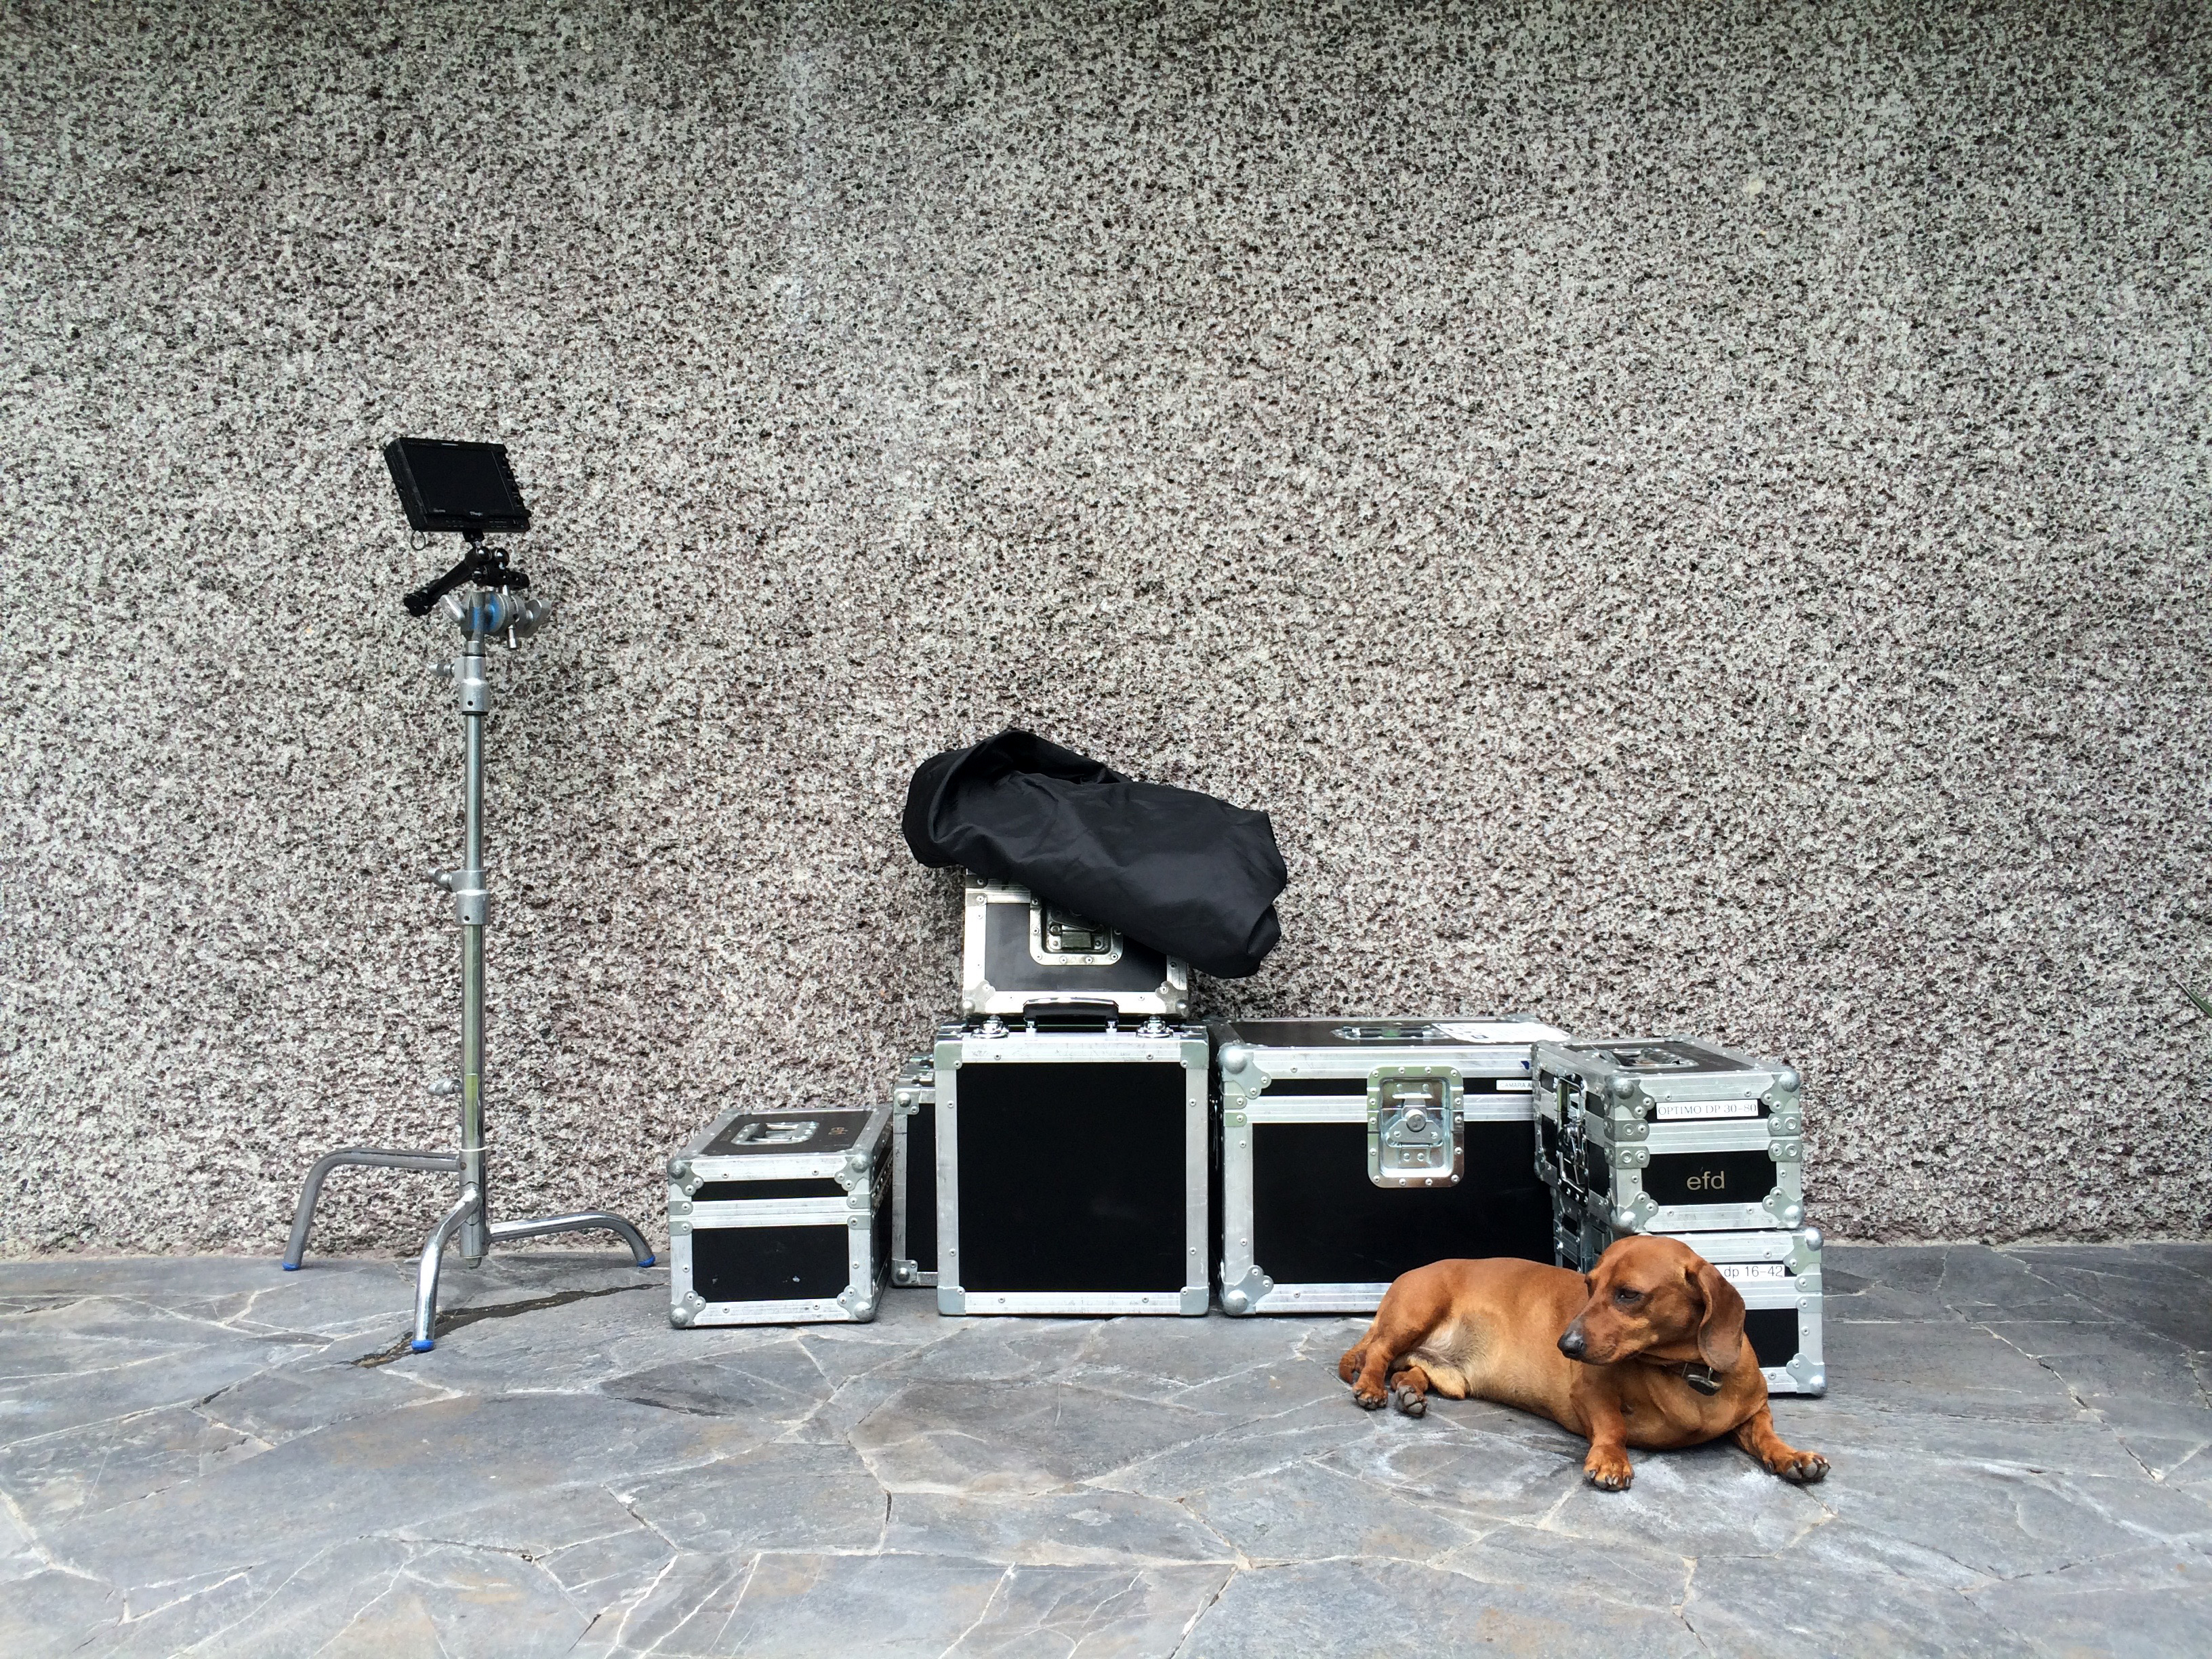 ART21 production gear in Pedro Reyes' home in Mexico City, Mexico, 2016. Behind the scenes of ART21’s series Art in the Twenty-First Century, Season 8, 2016. Photo: Ian Forster. © ART21, Inc. 2016.